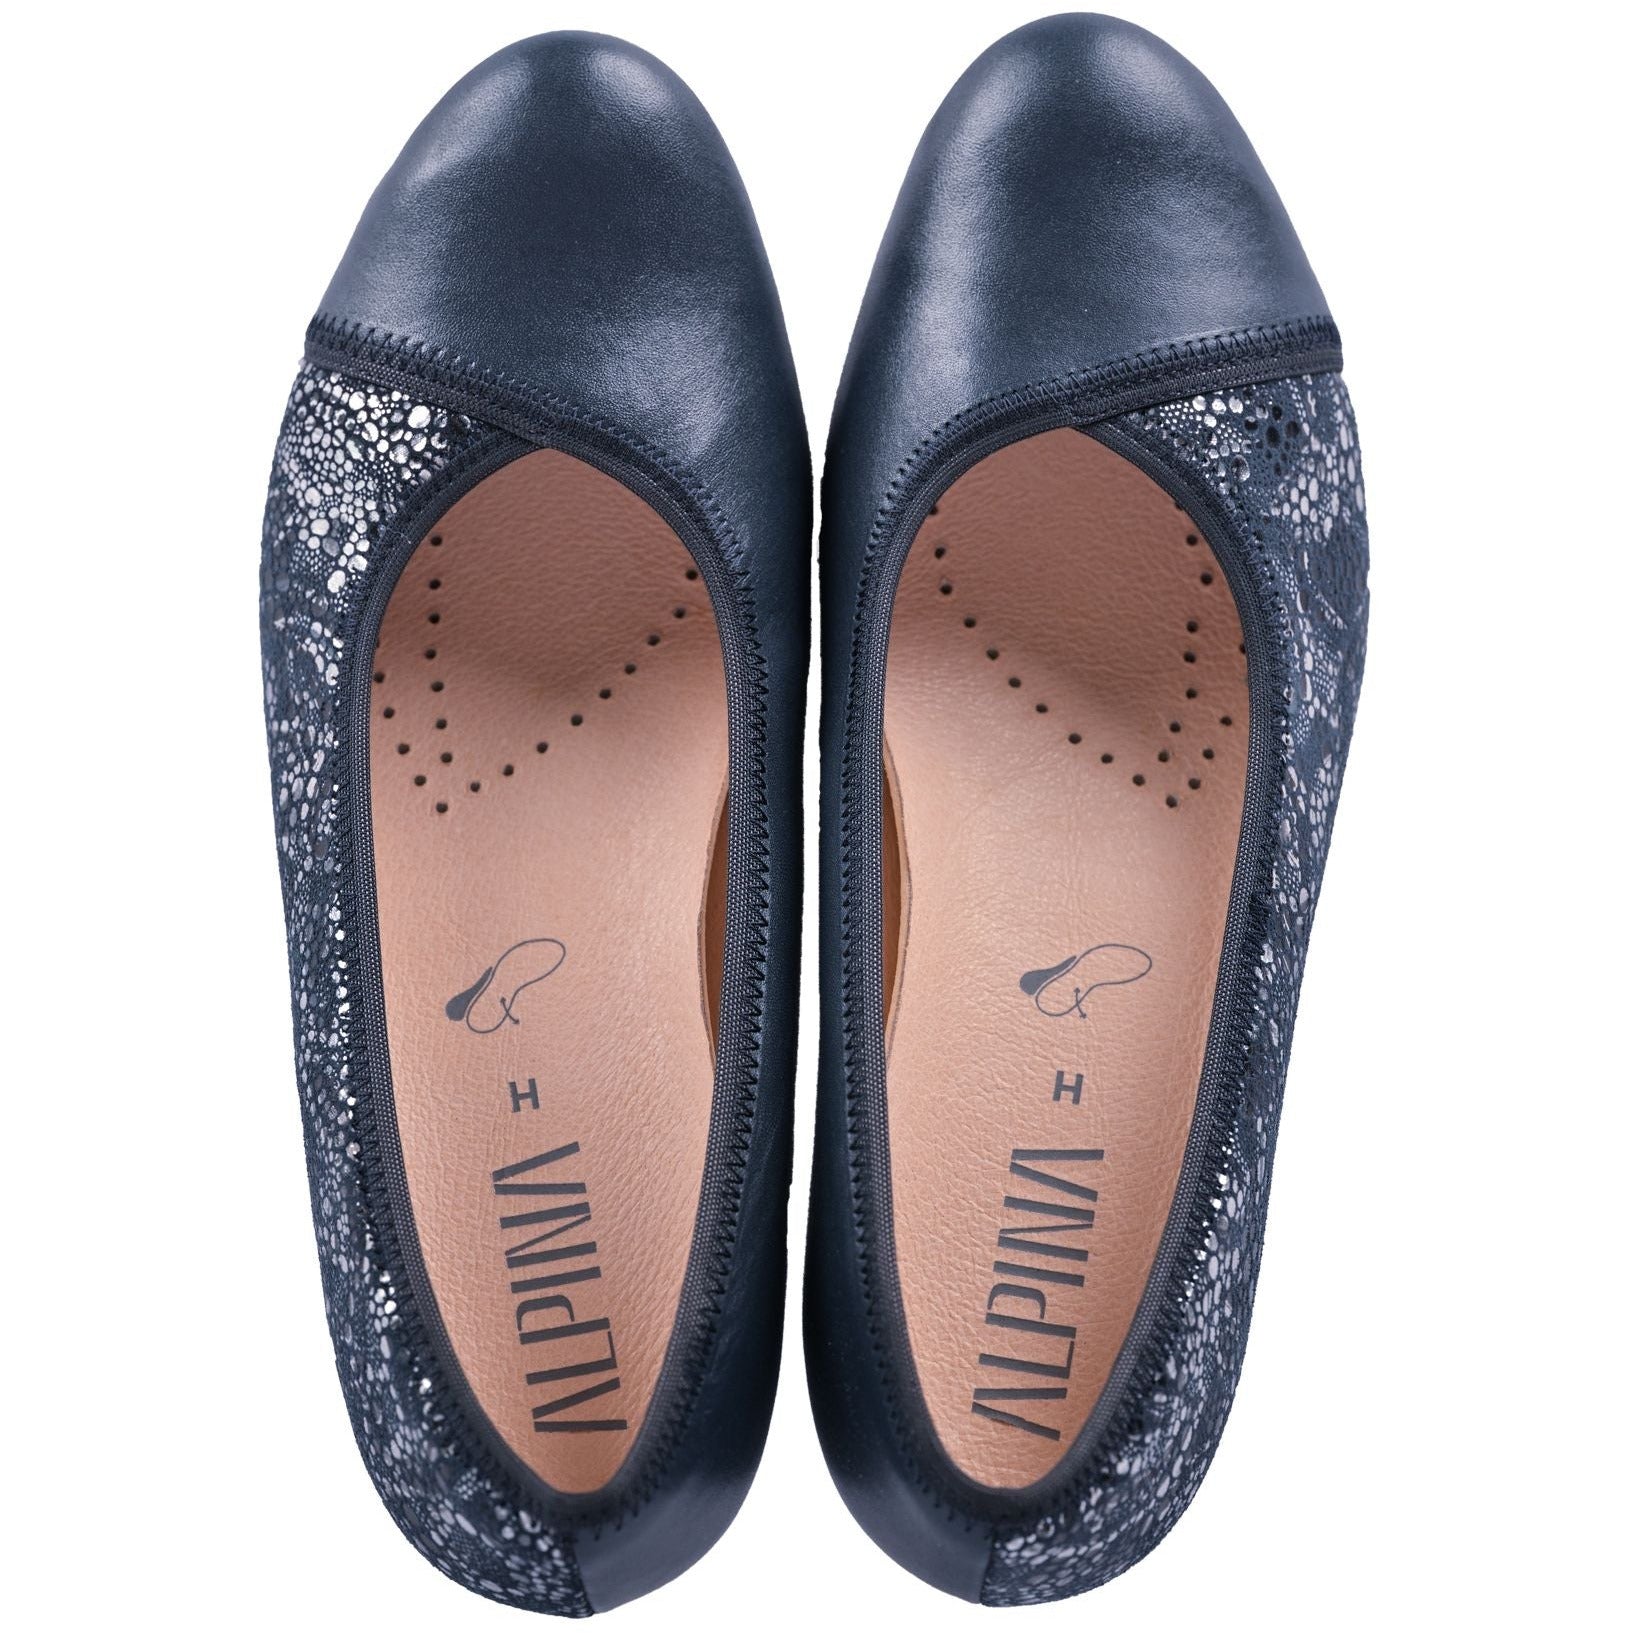 The softly cushioned insole has a leather surface and is removable.